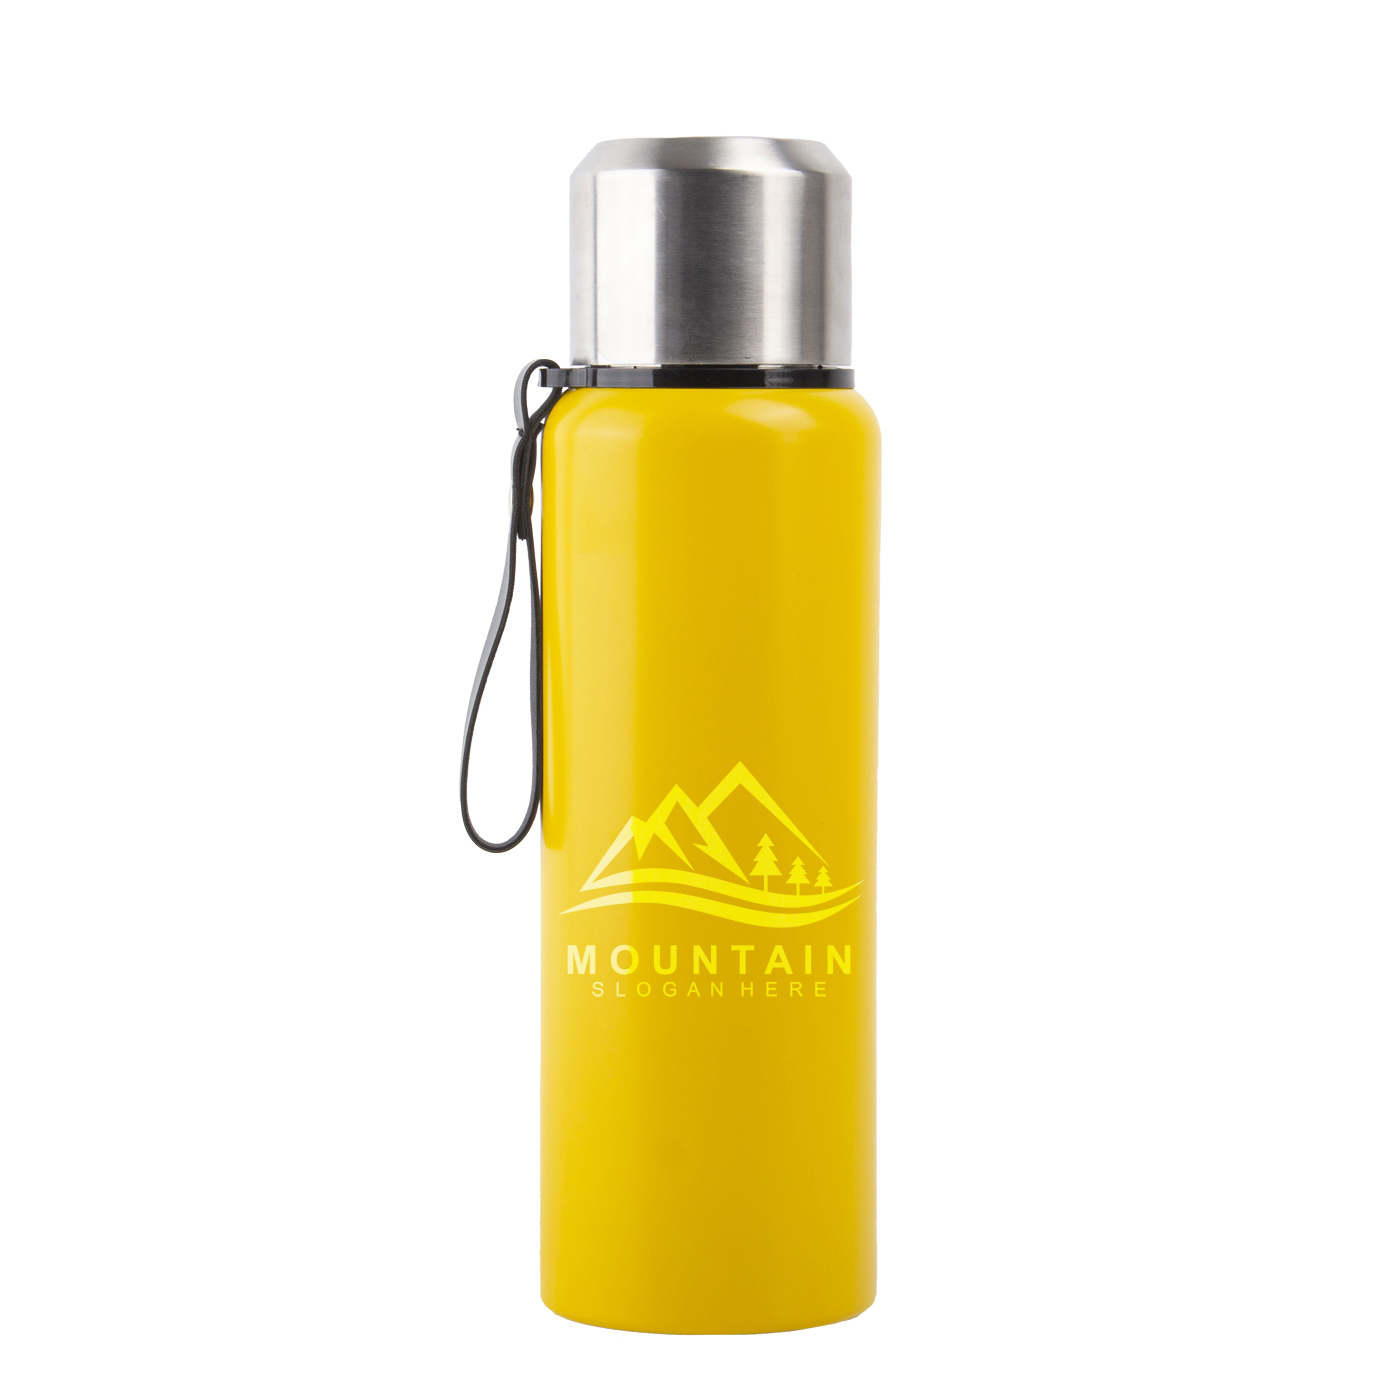 26 oz. Double Wall Vacuum Insulated Thermos Flask